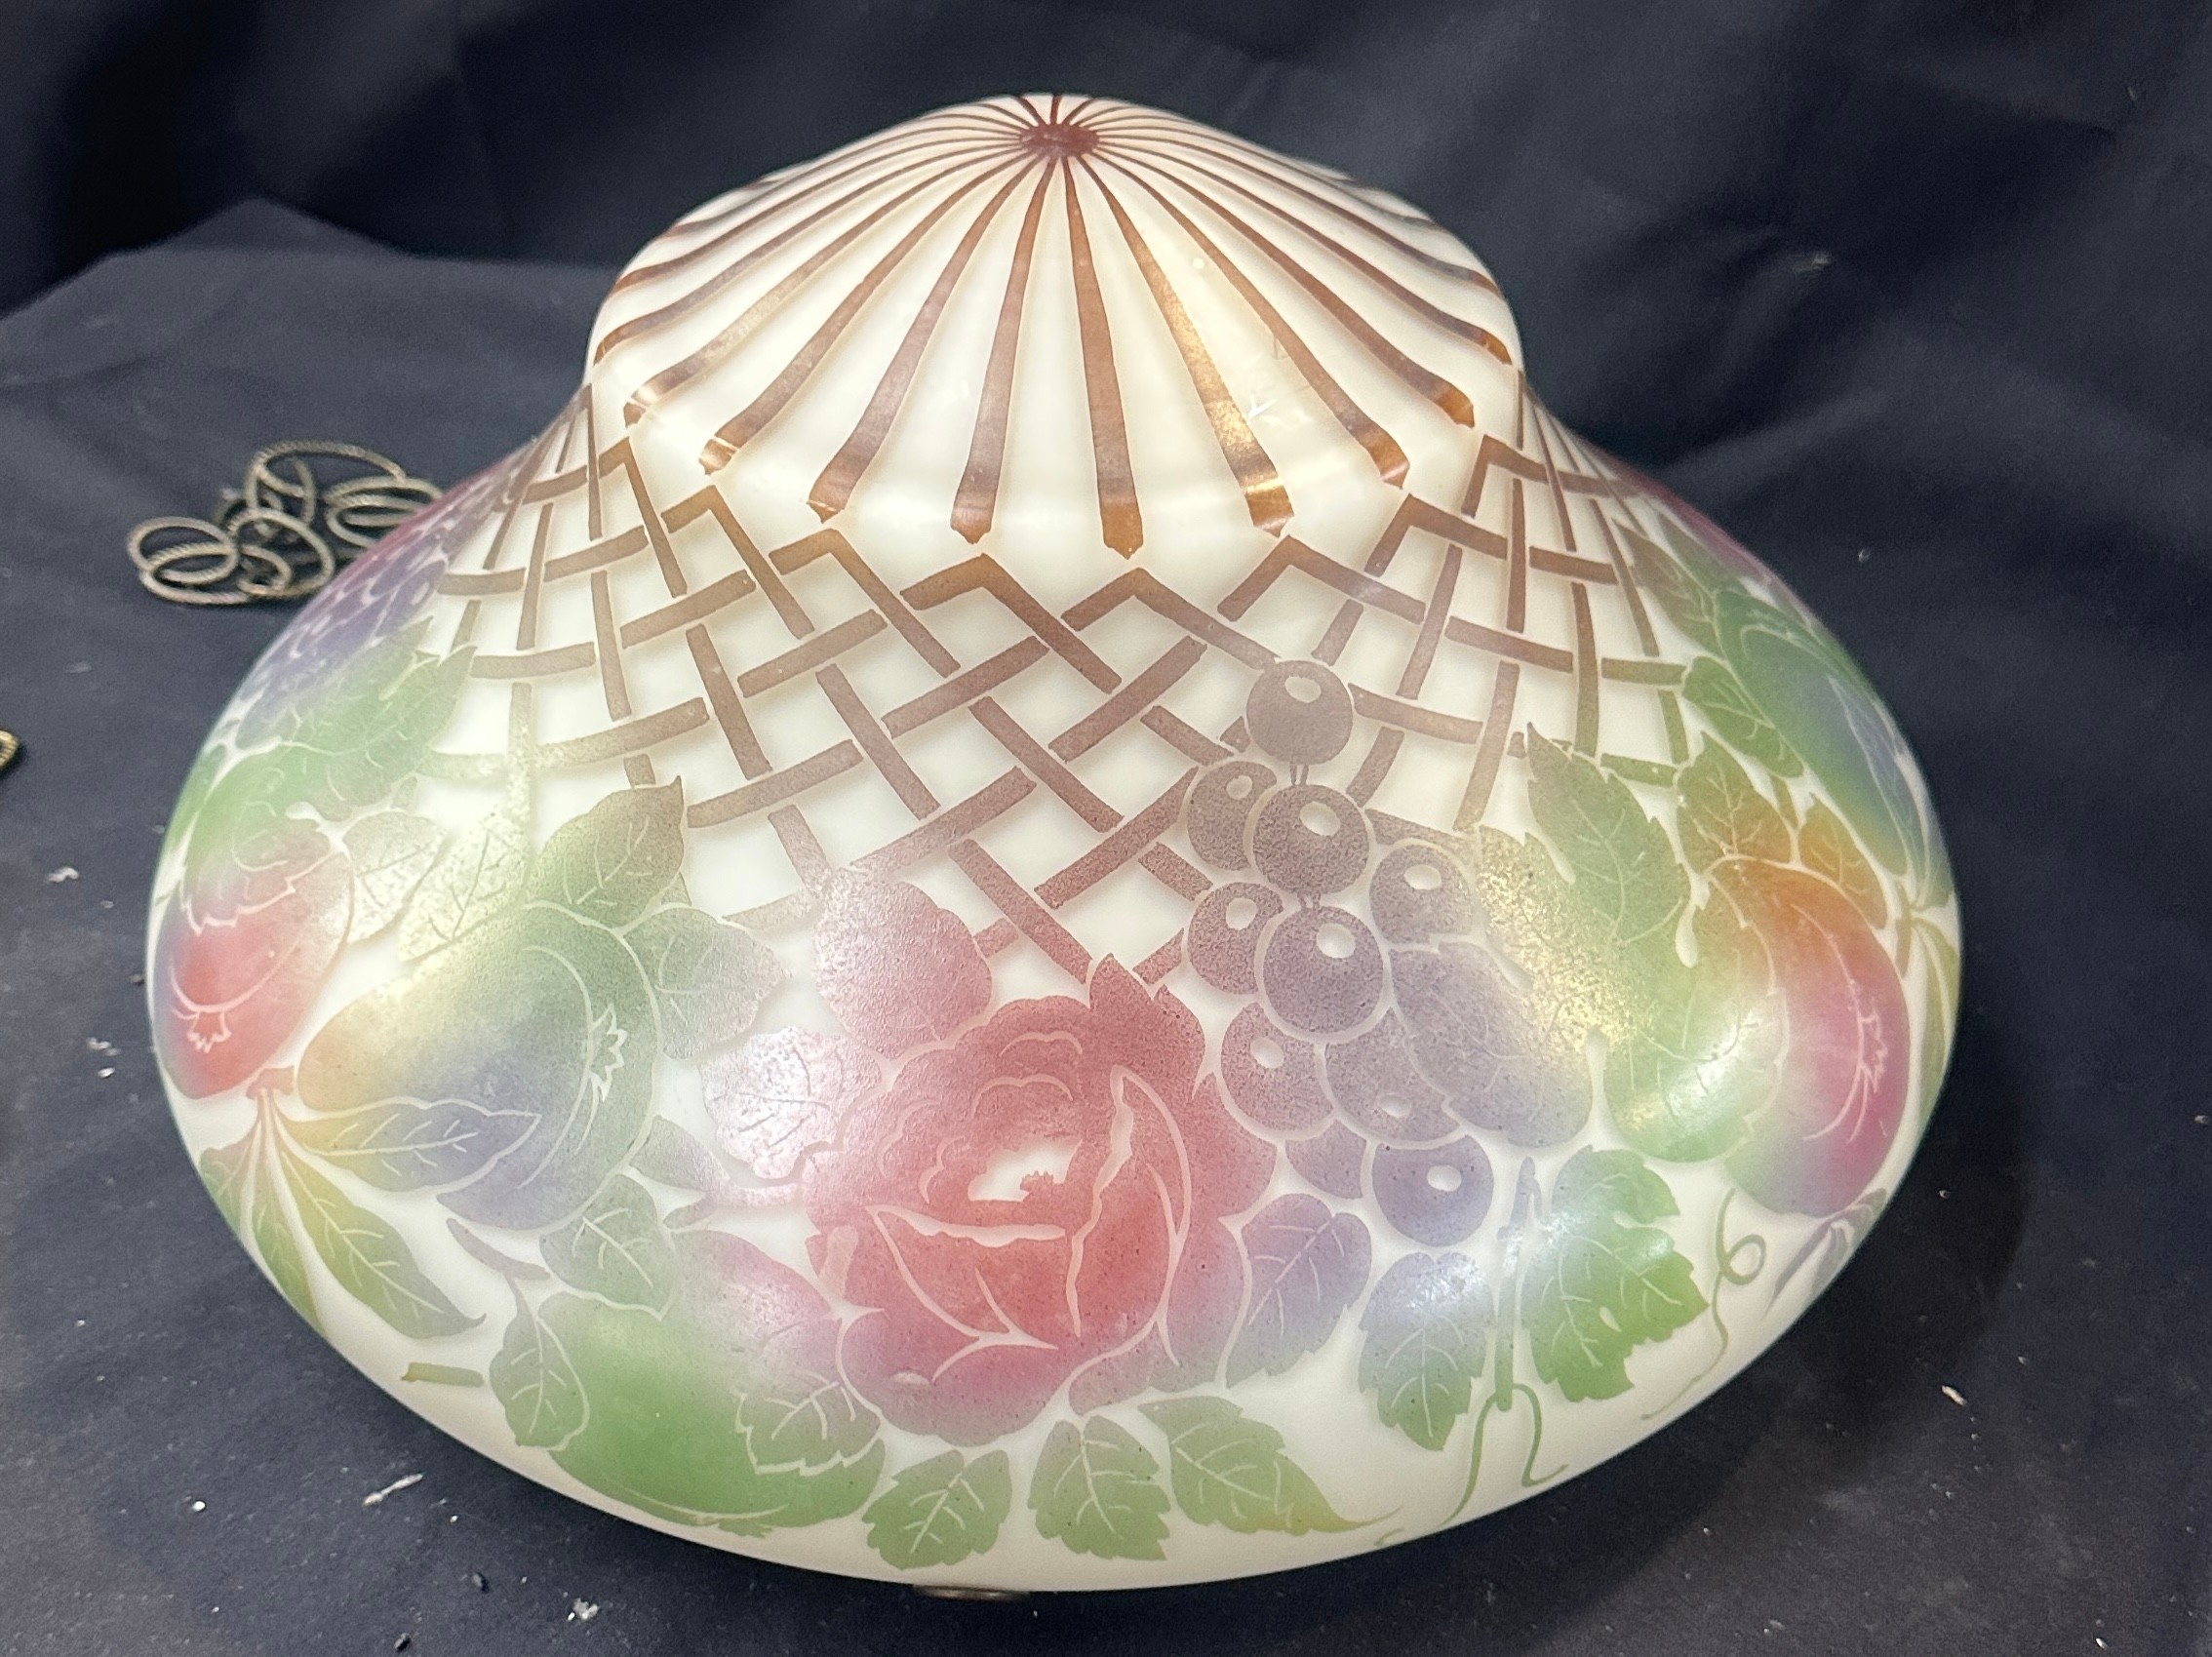 Signed Nancito french floral glass diffuser shade measures approx 40 inches diameter - Image 2 of 5